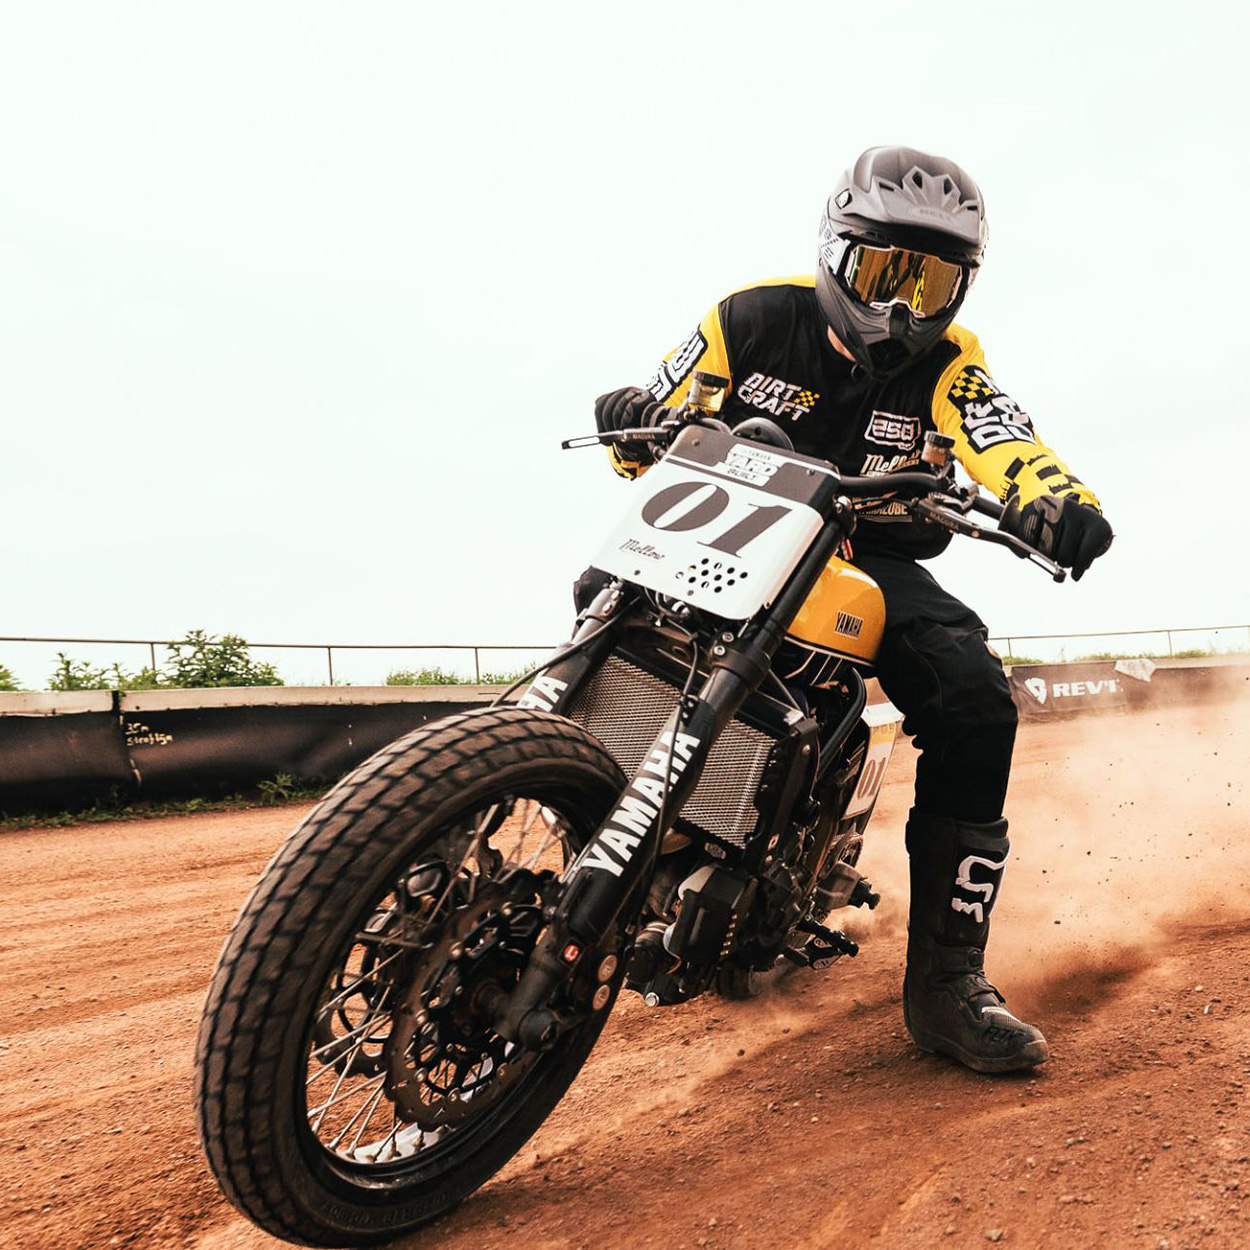 Yamaha XSR700 flat tracker by Mellow Motorcycles